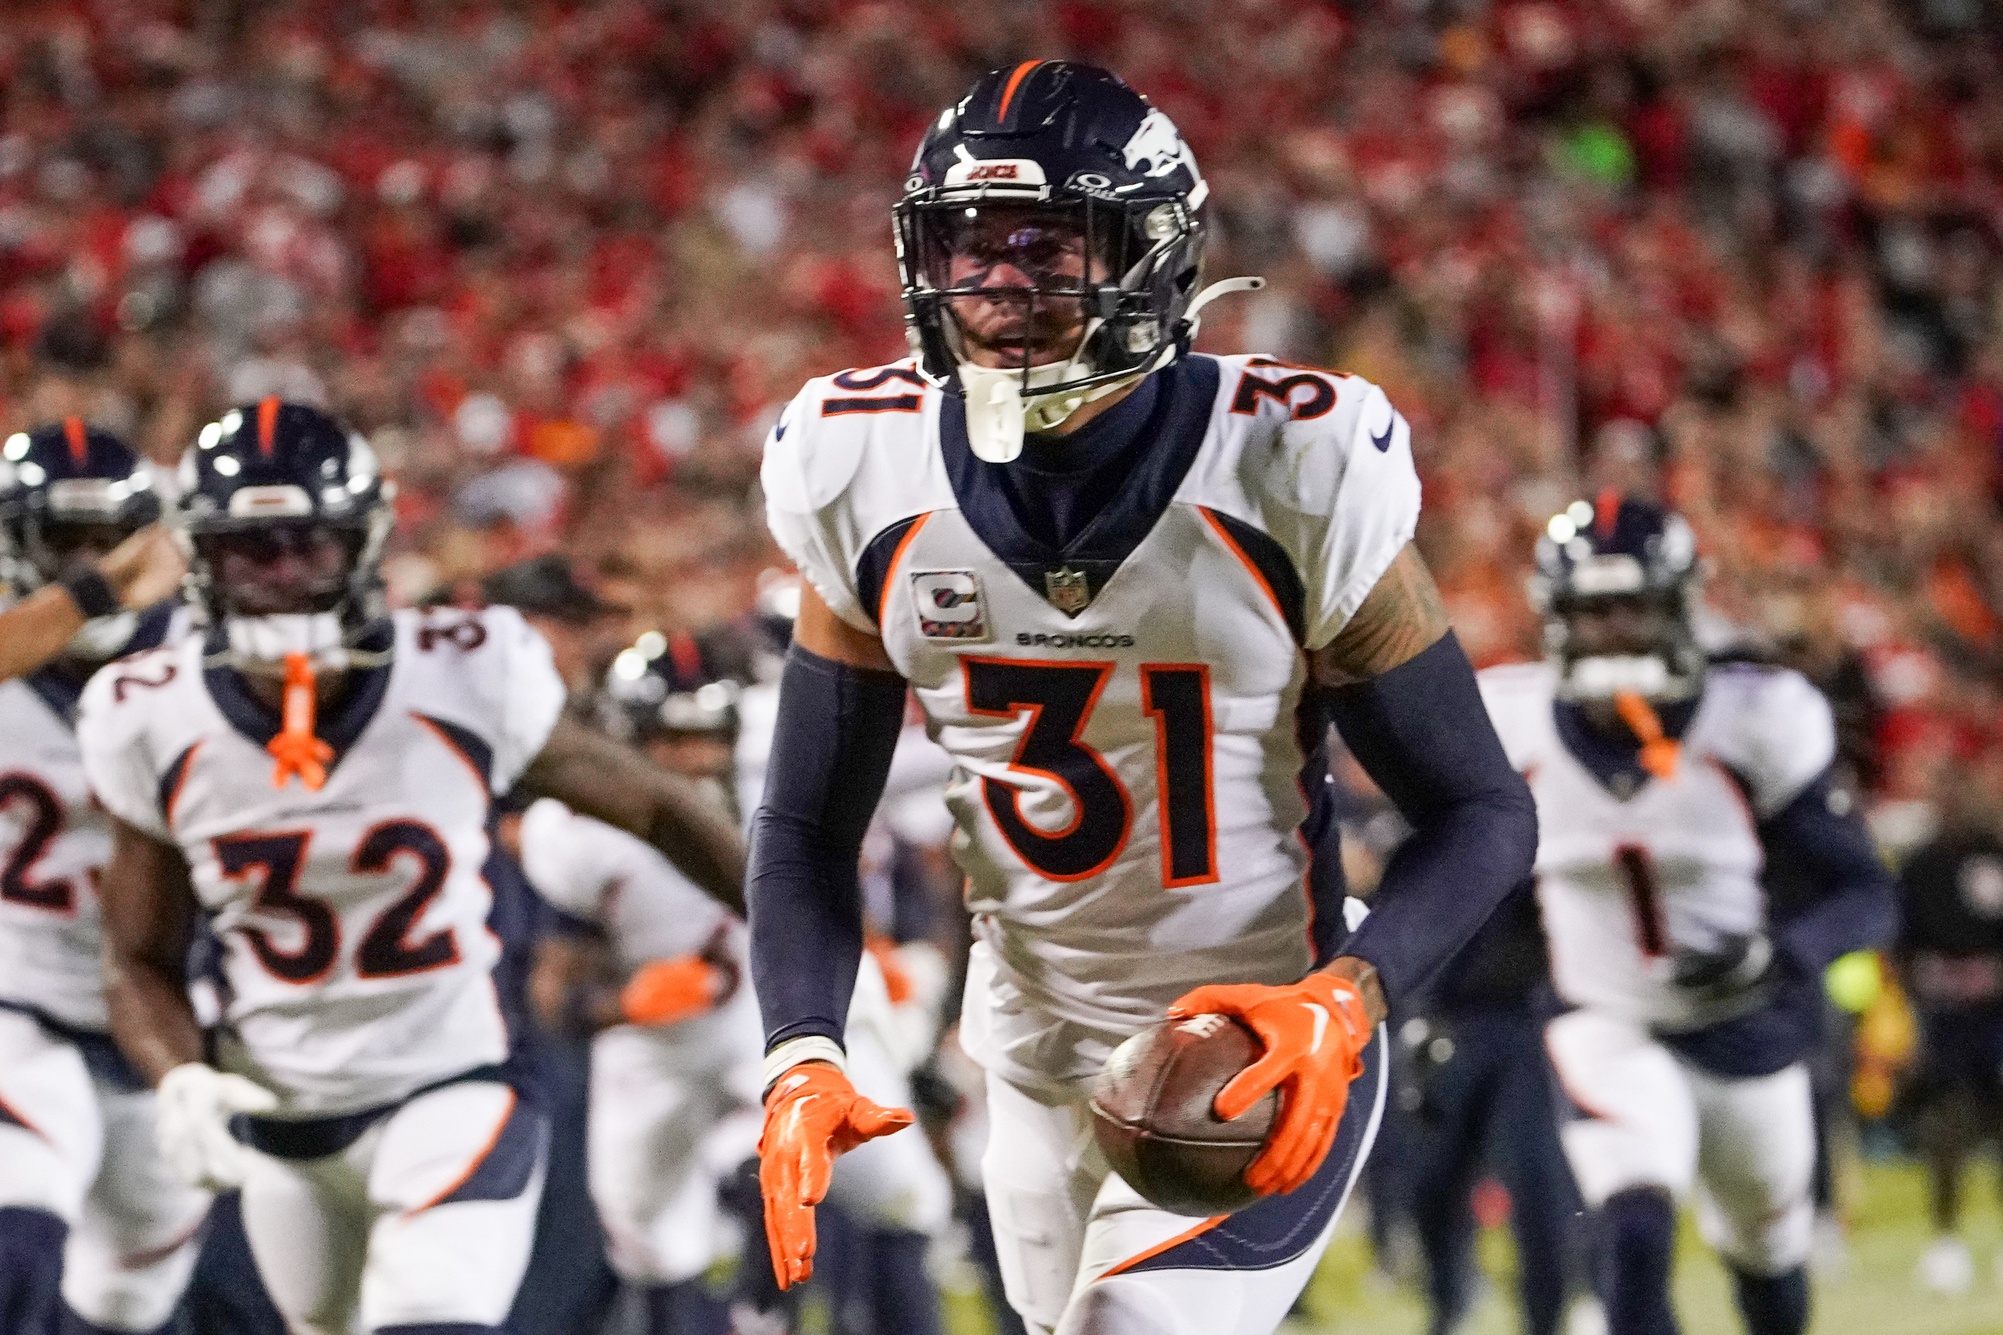 Denver Broncos safety Justin Simmons (31) celebrates after making an interception against the Kansas City Chiefs during the first half at GEHA Field at Arrowhead Stadium.